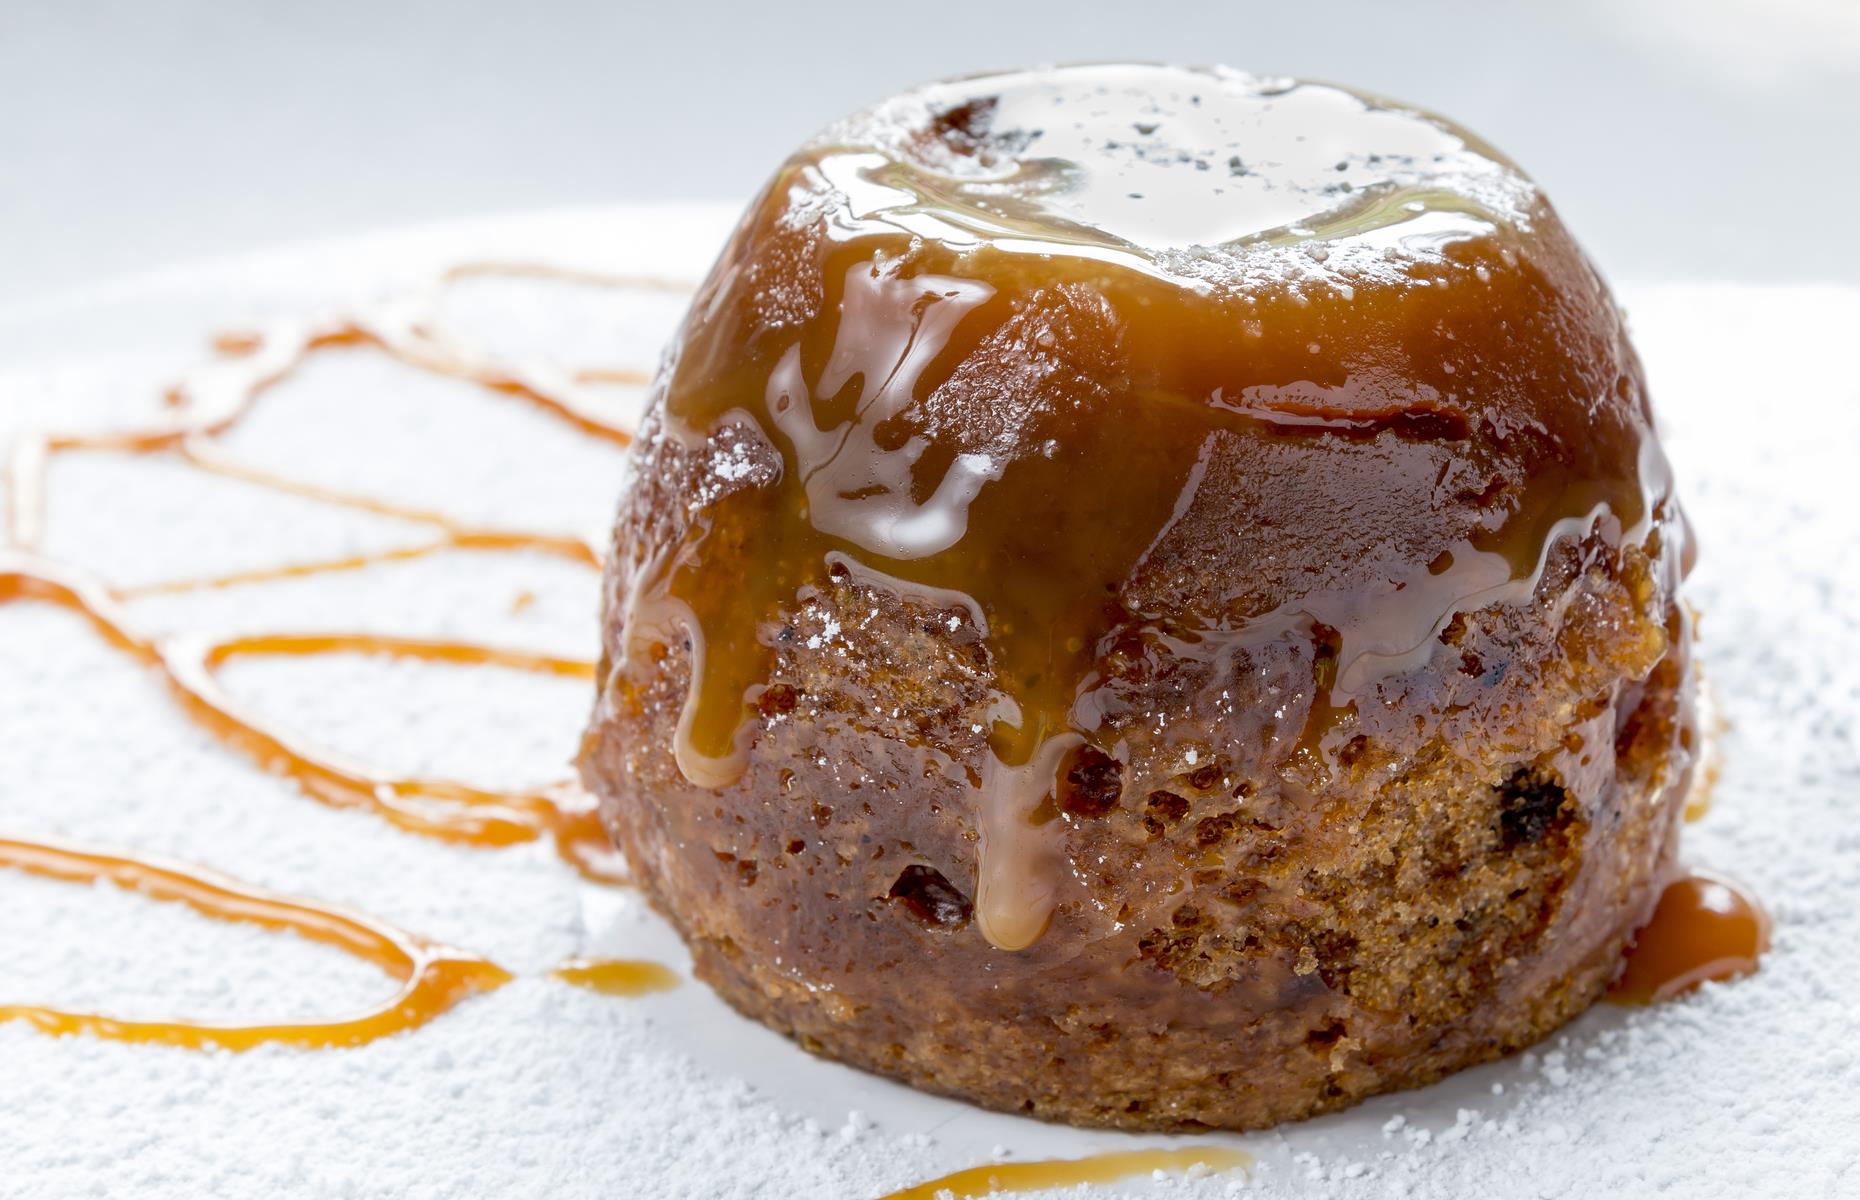 <p>Sticky toffee pudding from Berkshire pub the Old Boot Inn, near Newbury, is Kate Middleton's preferred dessert, according to <em>People</em>. The pub, and especially the 'moist and spongy' pudding, has long been a favourite with Kate and her family. Chef Rody Warot says the Princess of Wales also loves the pâté on toasted brioche or the roast figs on Parma ham with spicy apple chutney, followed by the tiger prawn and wild mushroom linguine.</p>